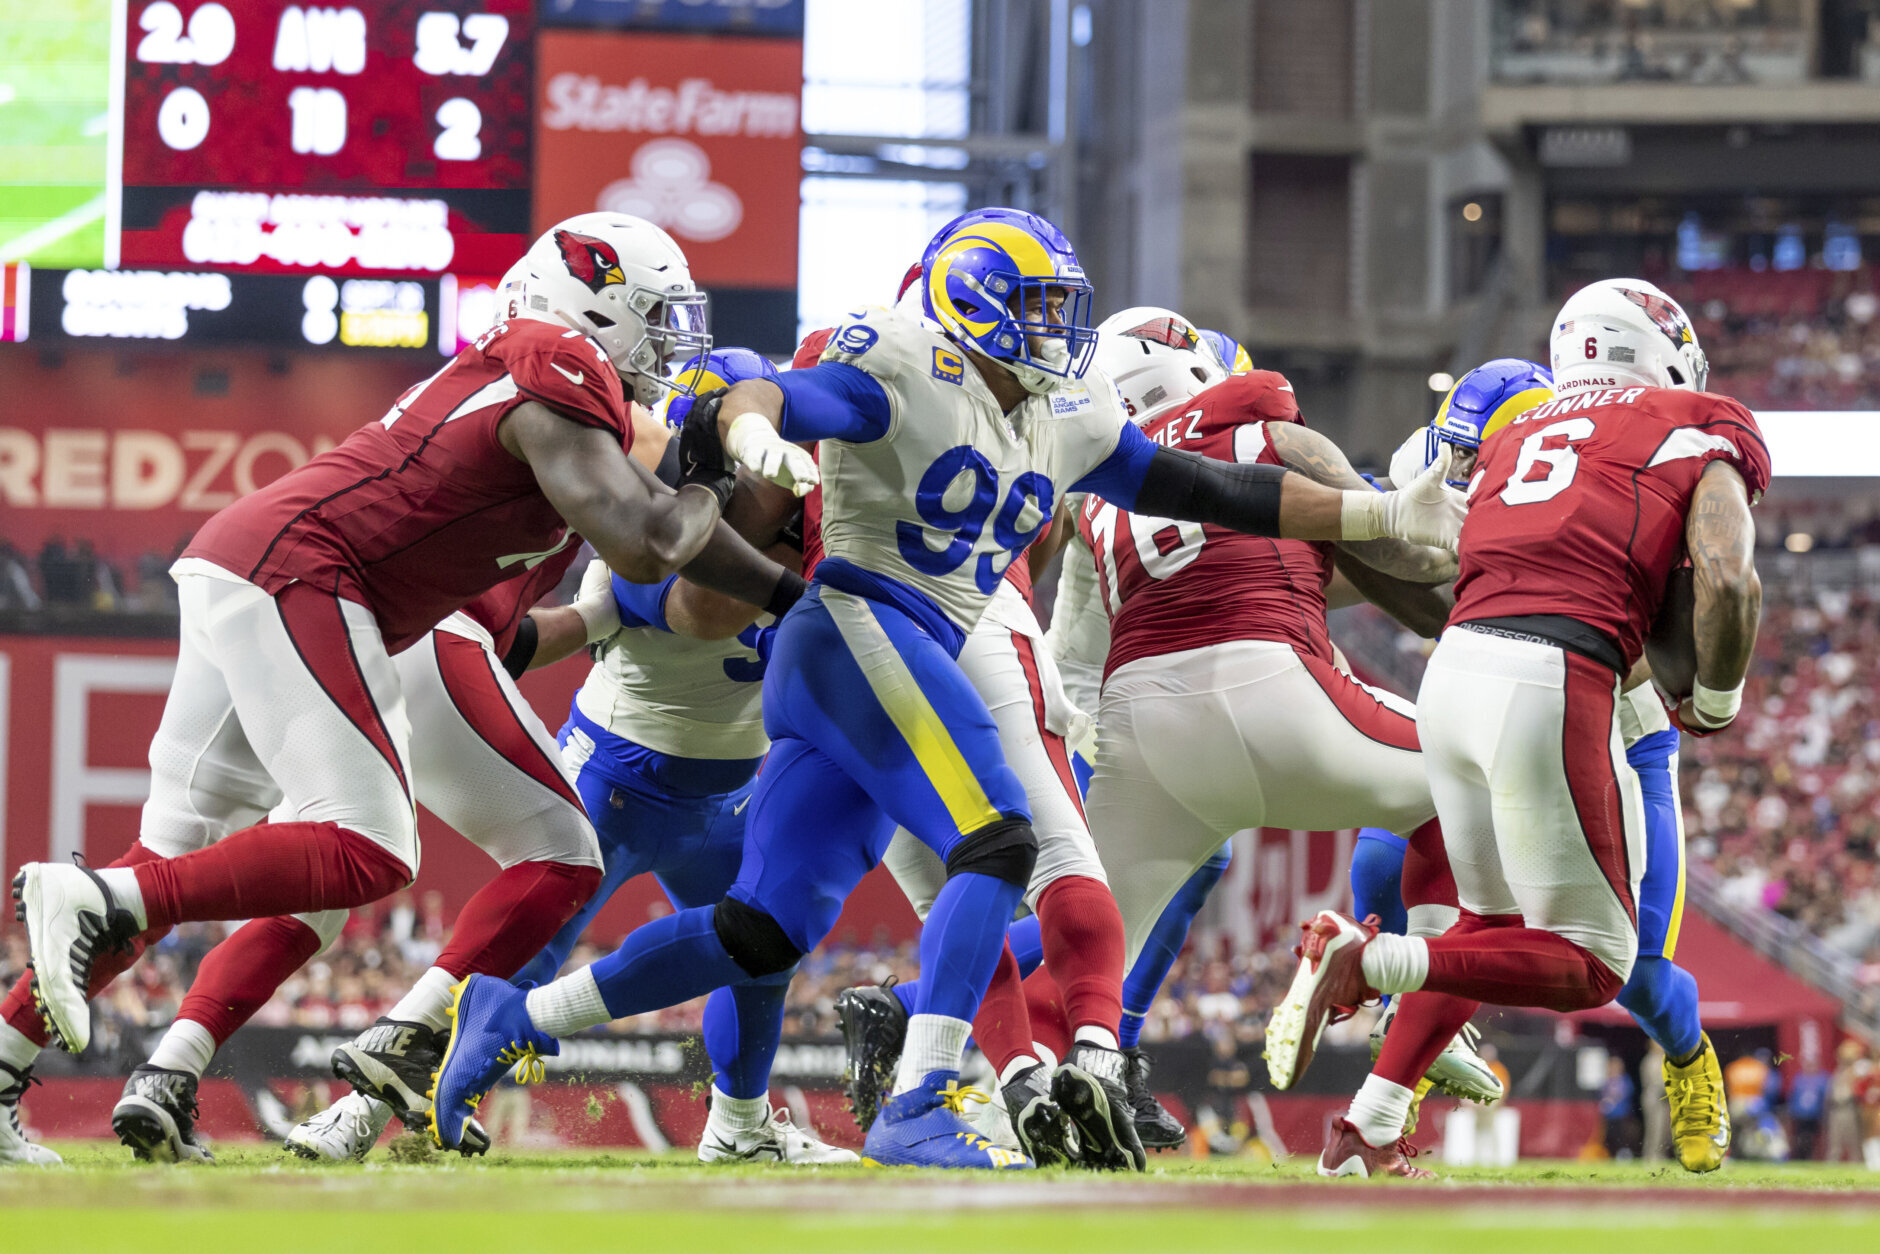 <p><em><strong>Rams 20</strong></em><br />
<em><strong>Cardinals 12</strong></em></p>
<p>Arizona has lost 11 of the last 12 meetings with the L.A. Rams so the closest thing to the Cardinals winning is losing without it being a total embarrassment.</p>
<p>Of course, Aaron Donald has been making people look silly for years, becoming the fastest in NFL history to 100 career sacks and joins John Randle as the only interior D-lineman to reach that milestone. Donald&#8217;s greatness can&#8217;t be overstated.</p>
